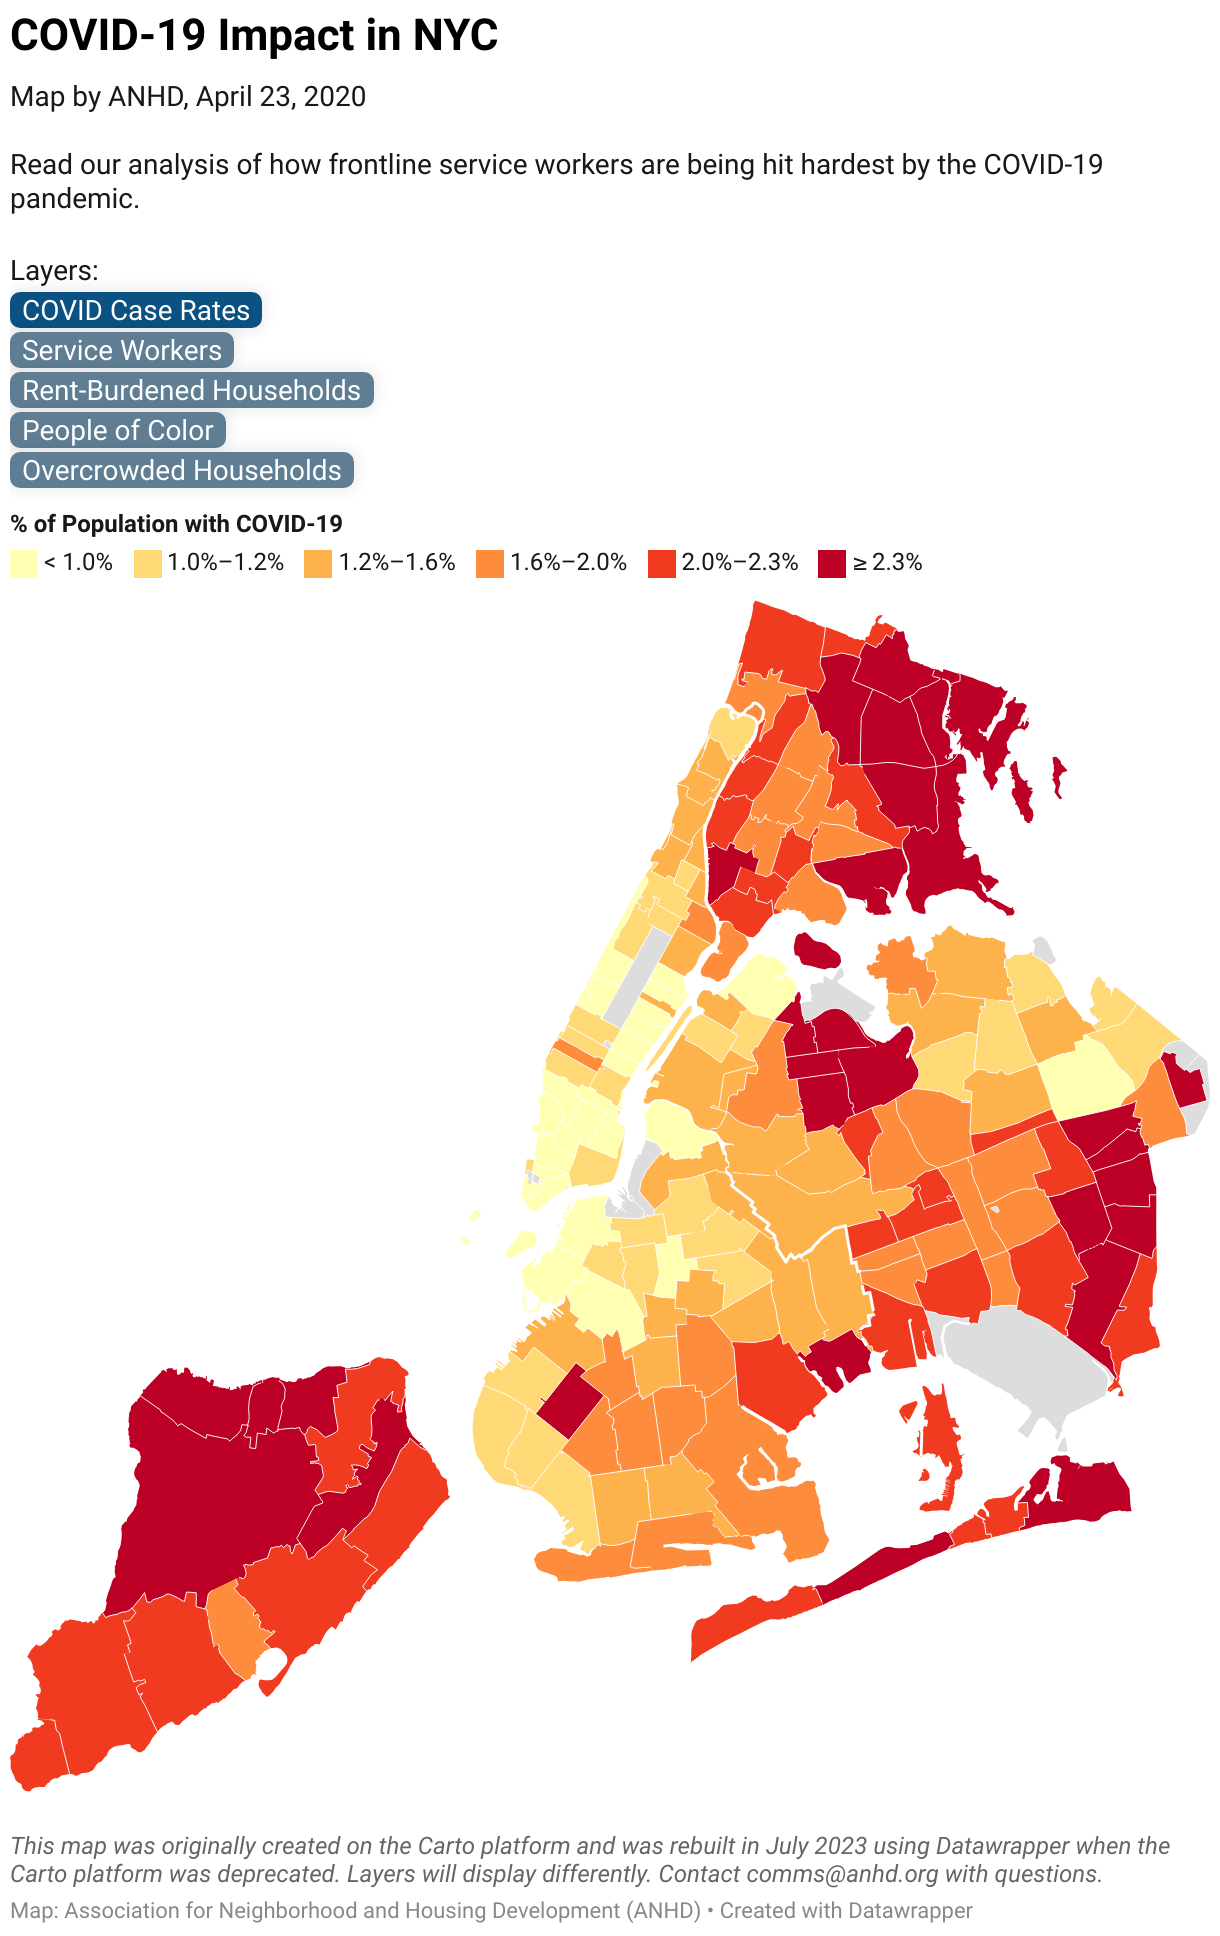 Map of COVID case rates by zip code in New York City as of 4/7/20